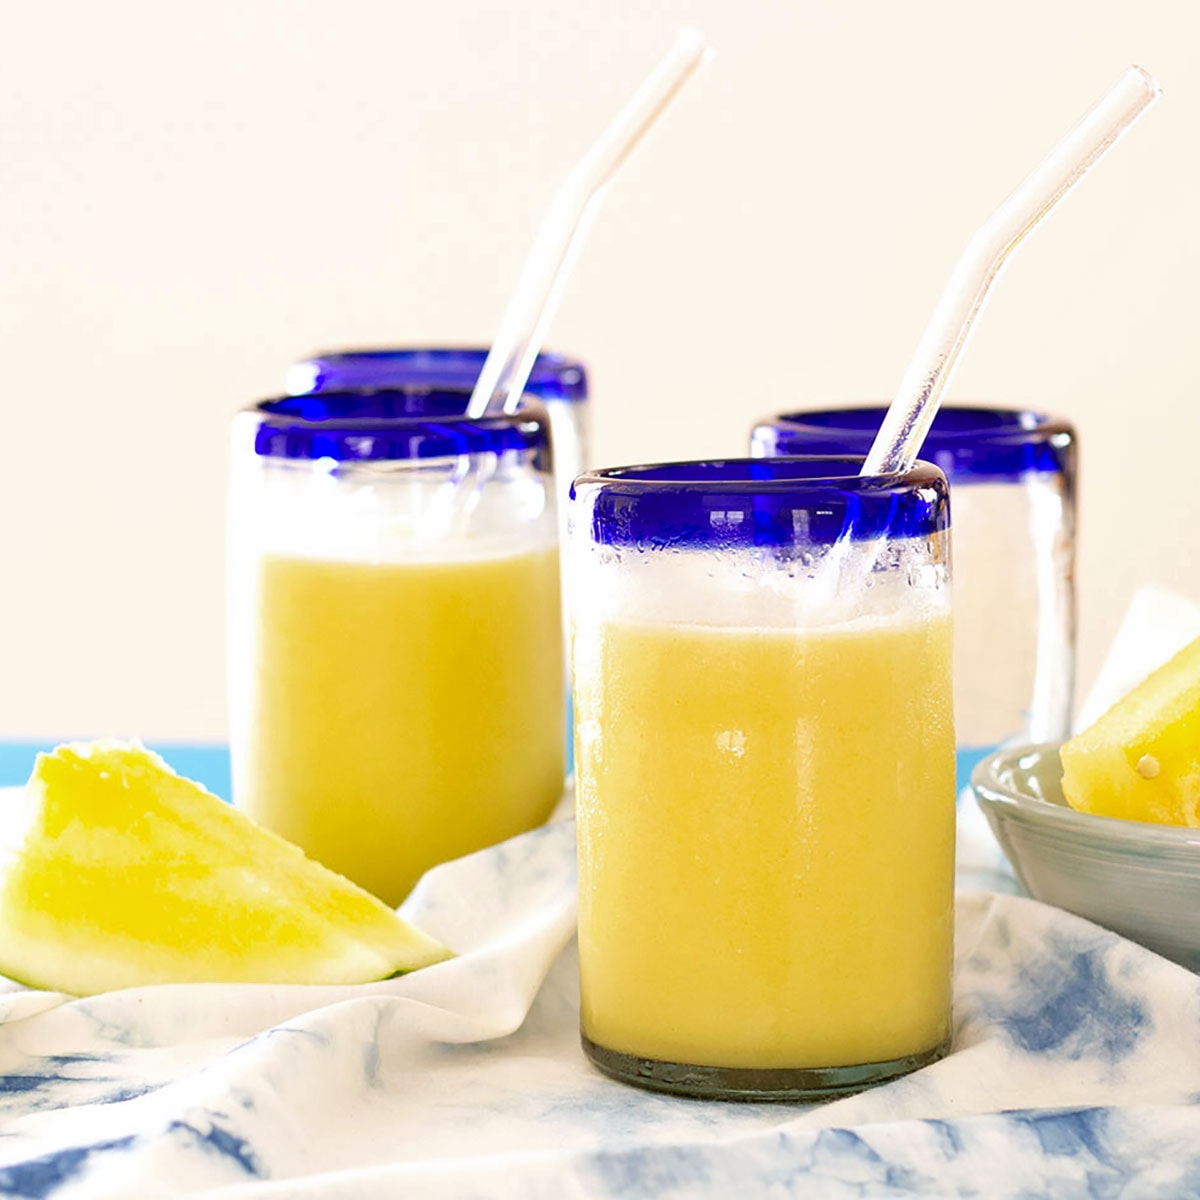 Two blue rimmed glasses filled with yellow coconut watermelon milk.